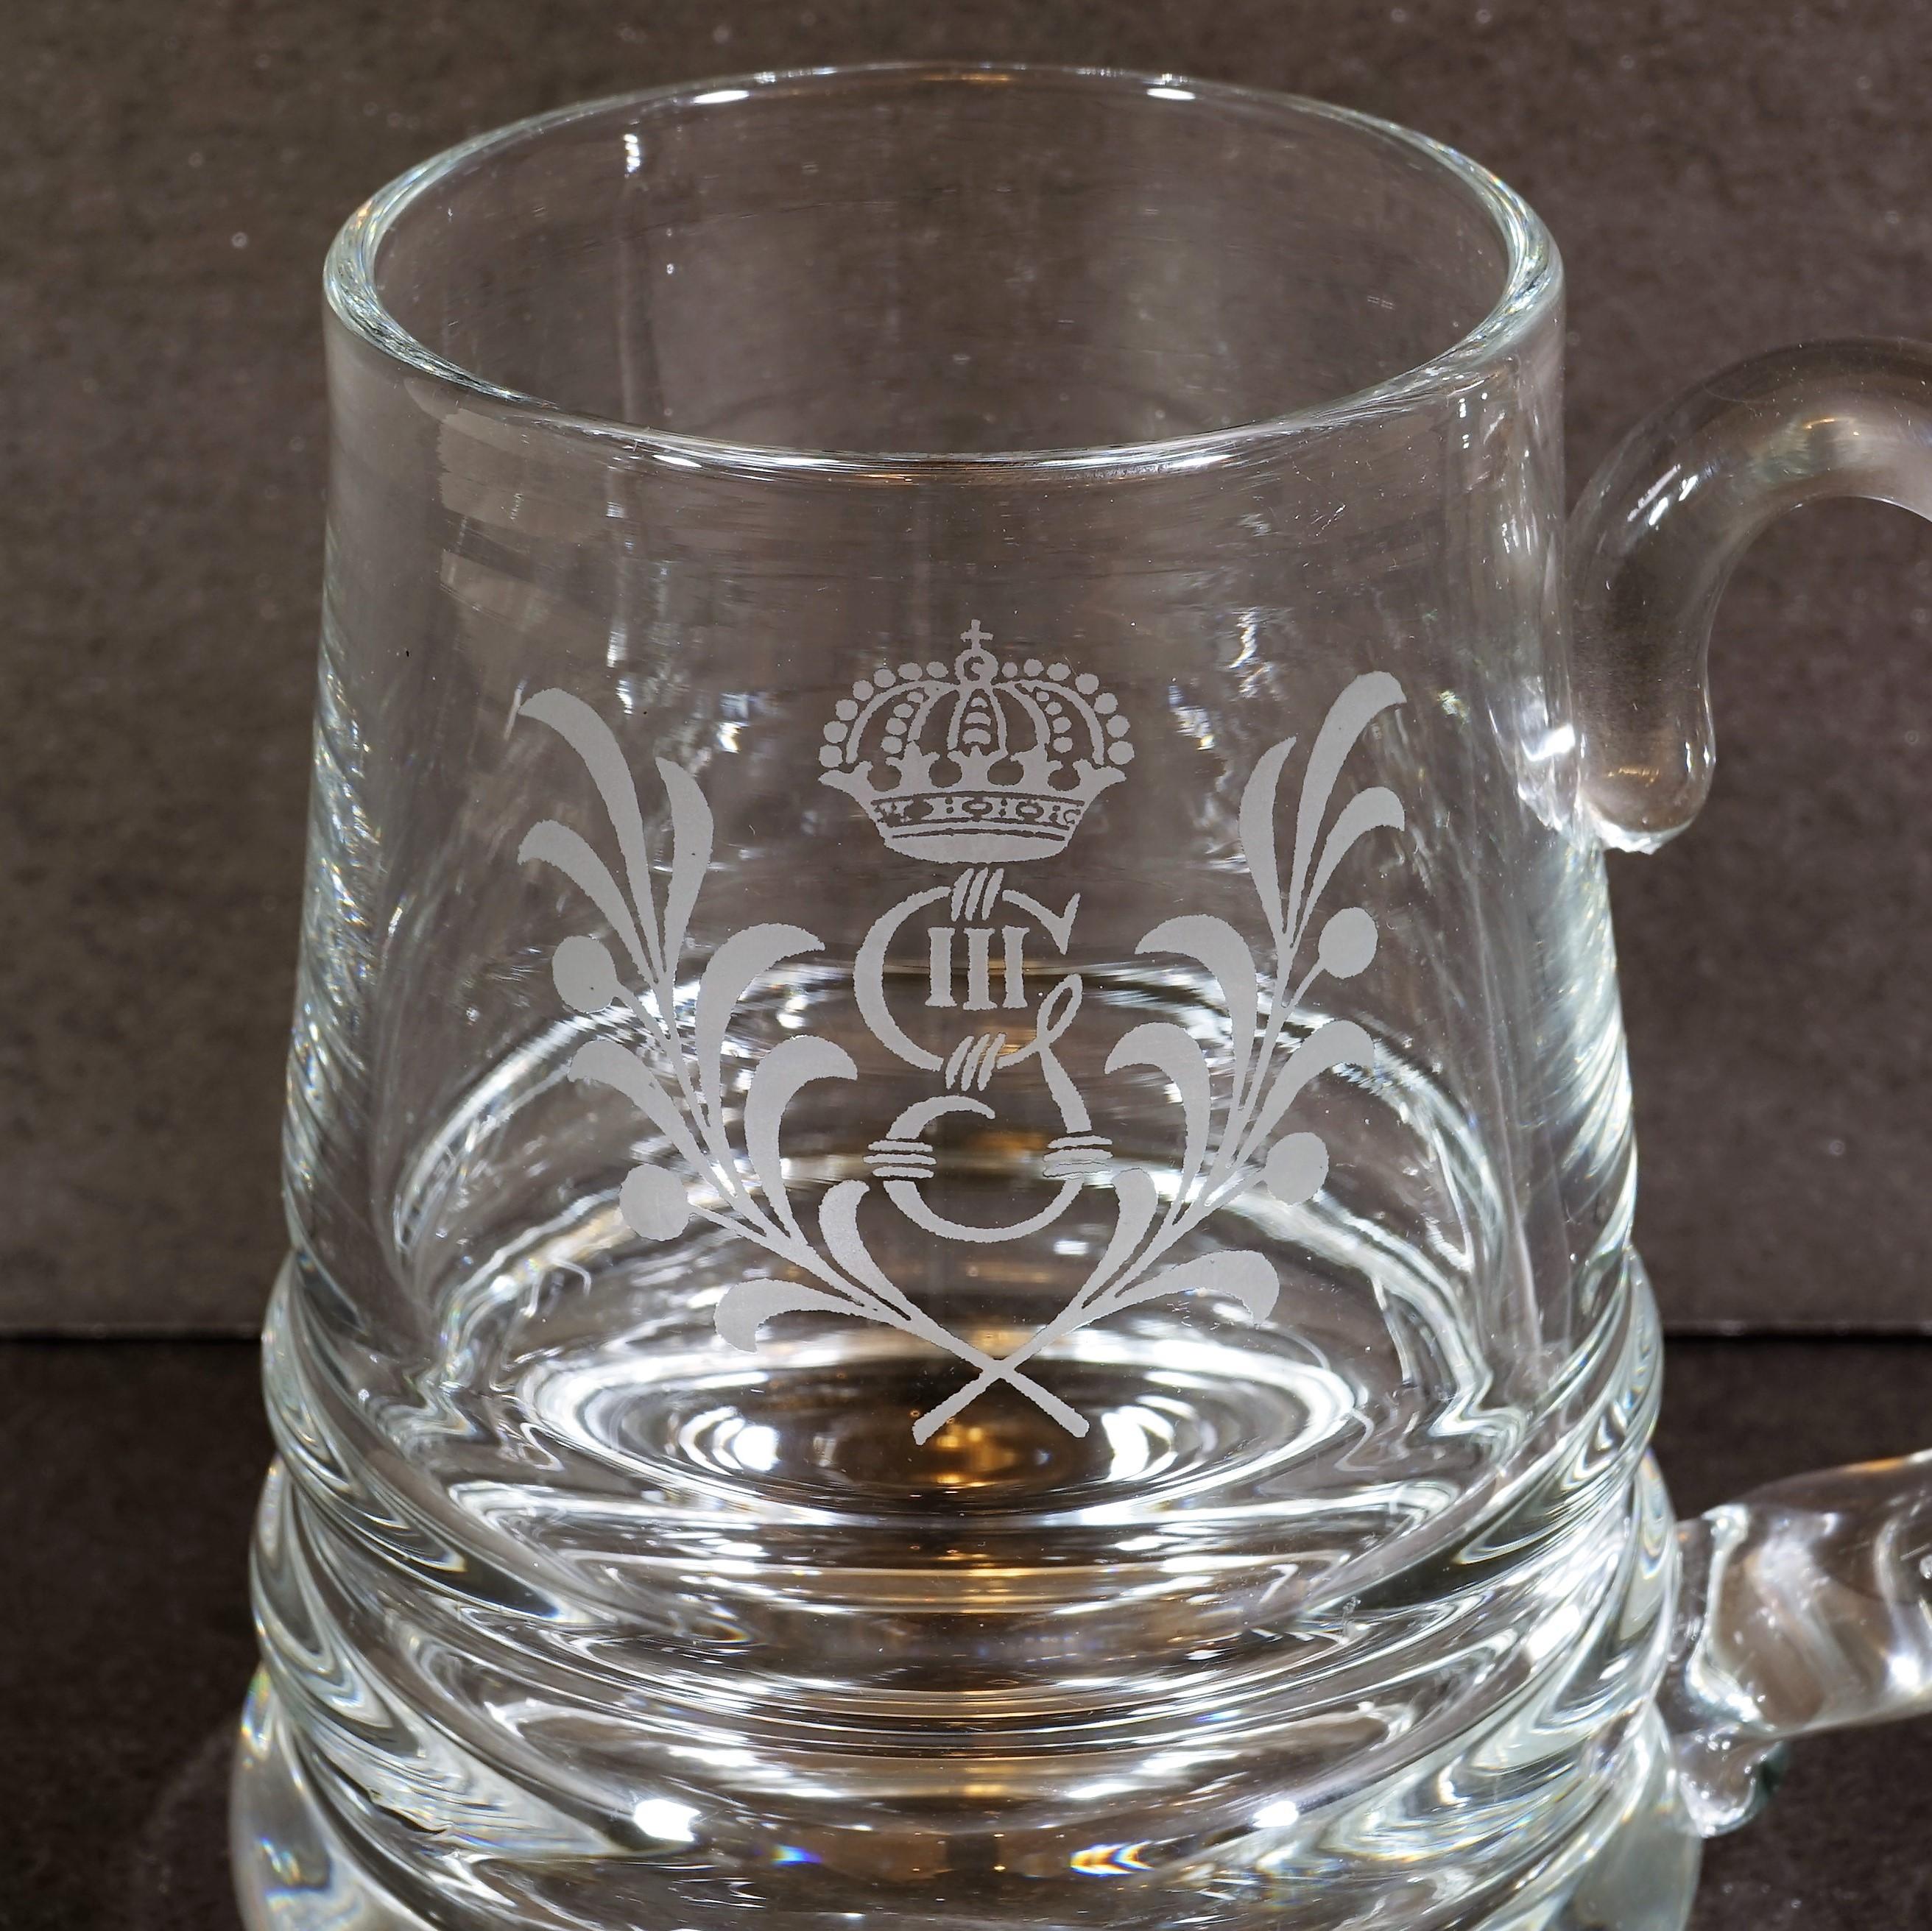 This set of six beer glasses from the Swedish grace period are dedicated to the memory of Gustav III, who was assassinated at a masquerade ball in Stockholm in 1792. They are clear glass vessels, with an acid etching of the King's heraldry.